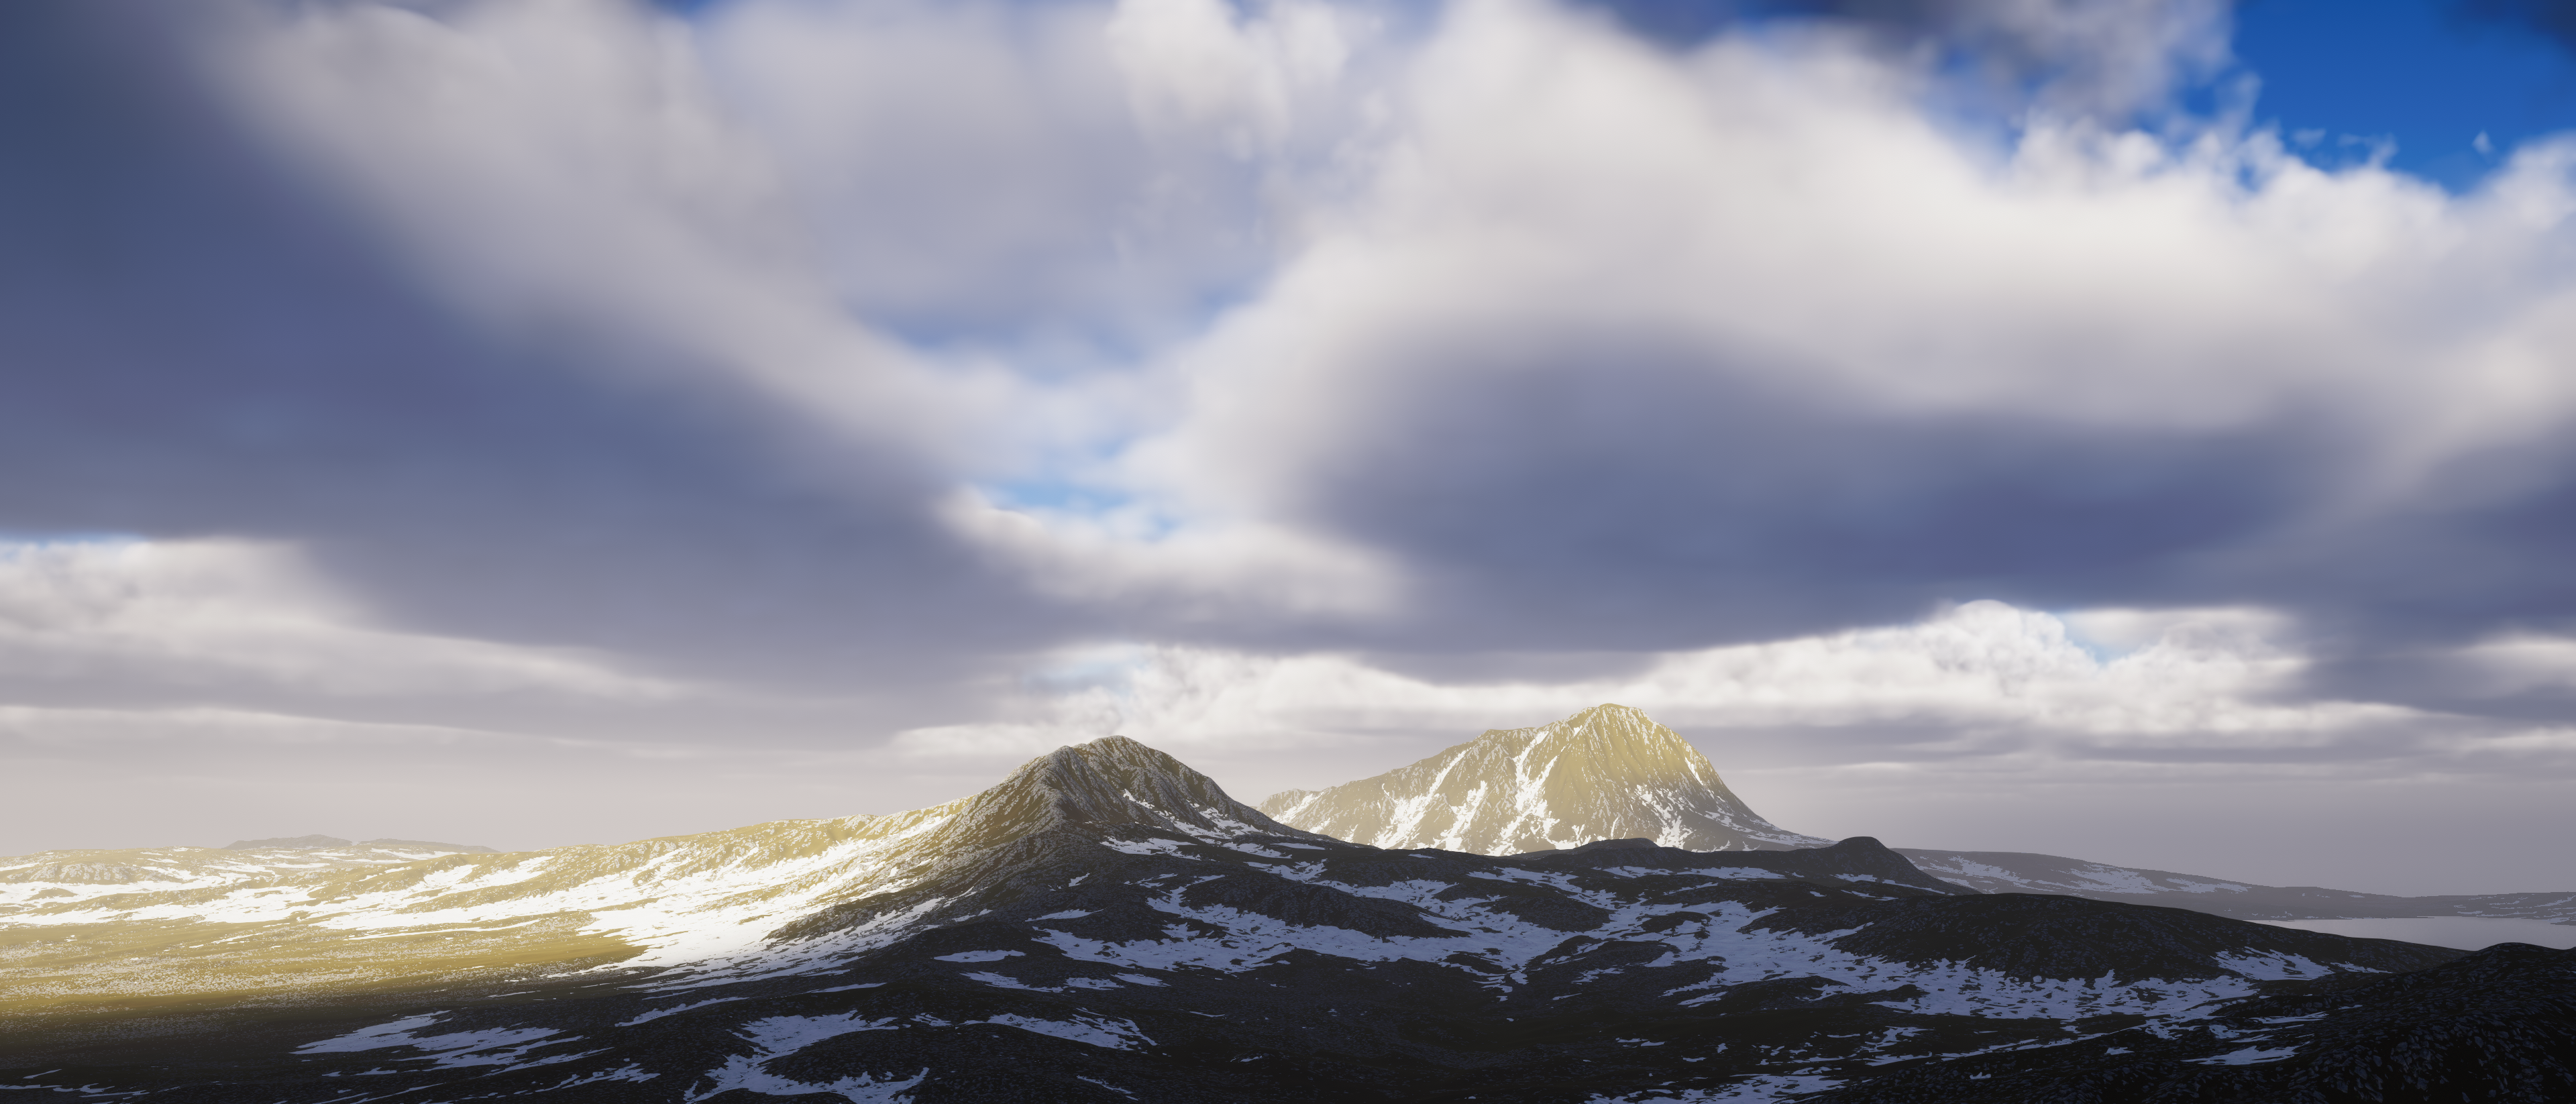 image of cloudy overcast above snowy mountain range